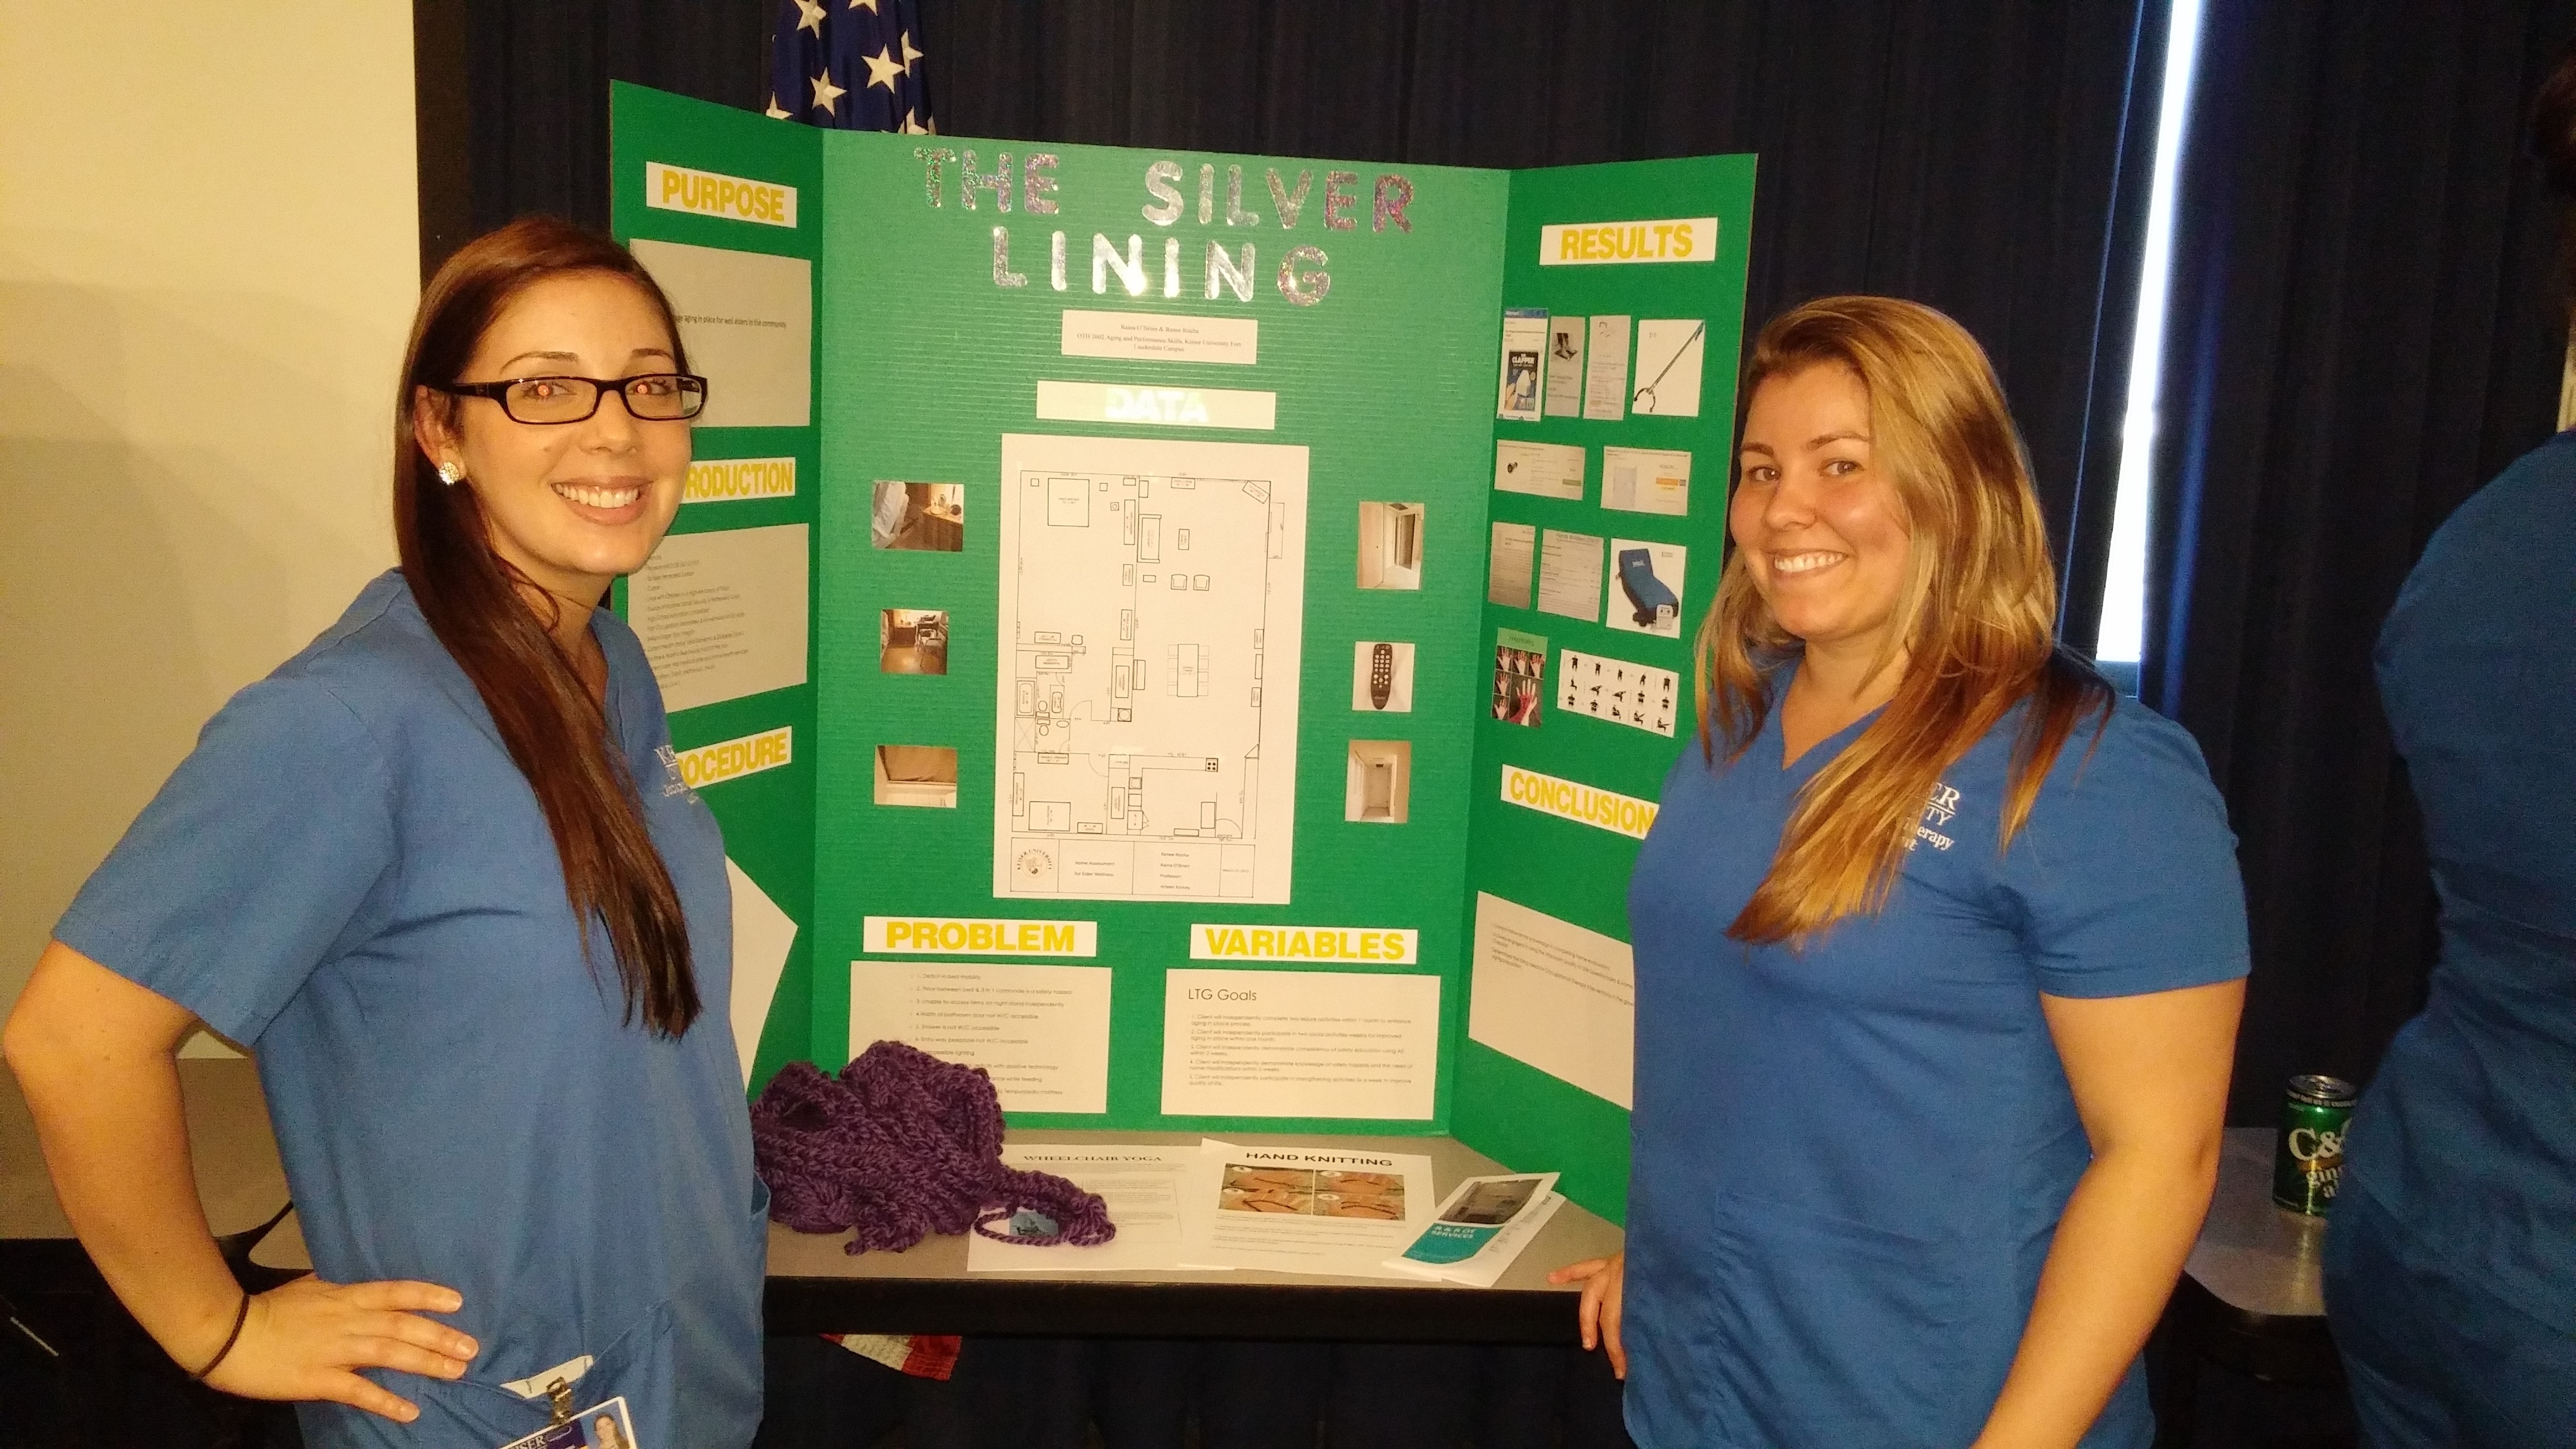 Ft. Lauderdale Occupational Therapy Assistant Students Create and Present Posters for Their Aging Course